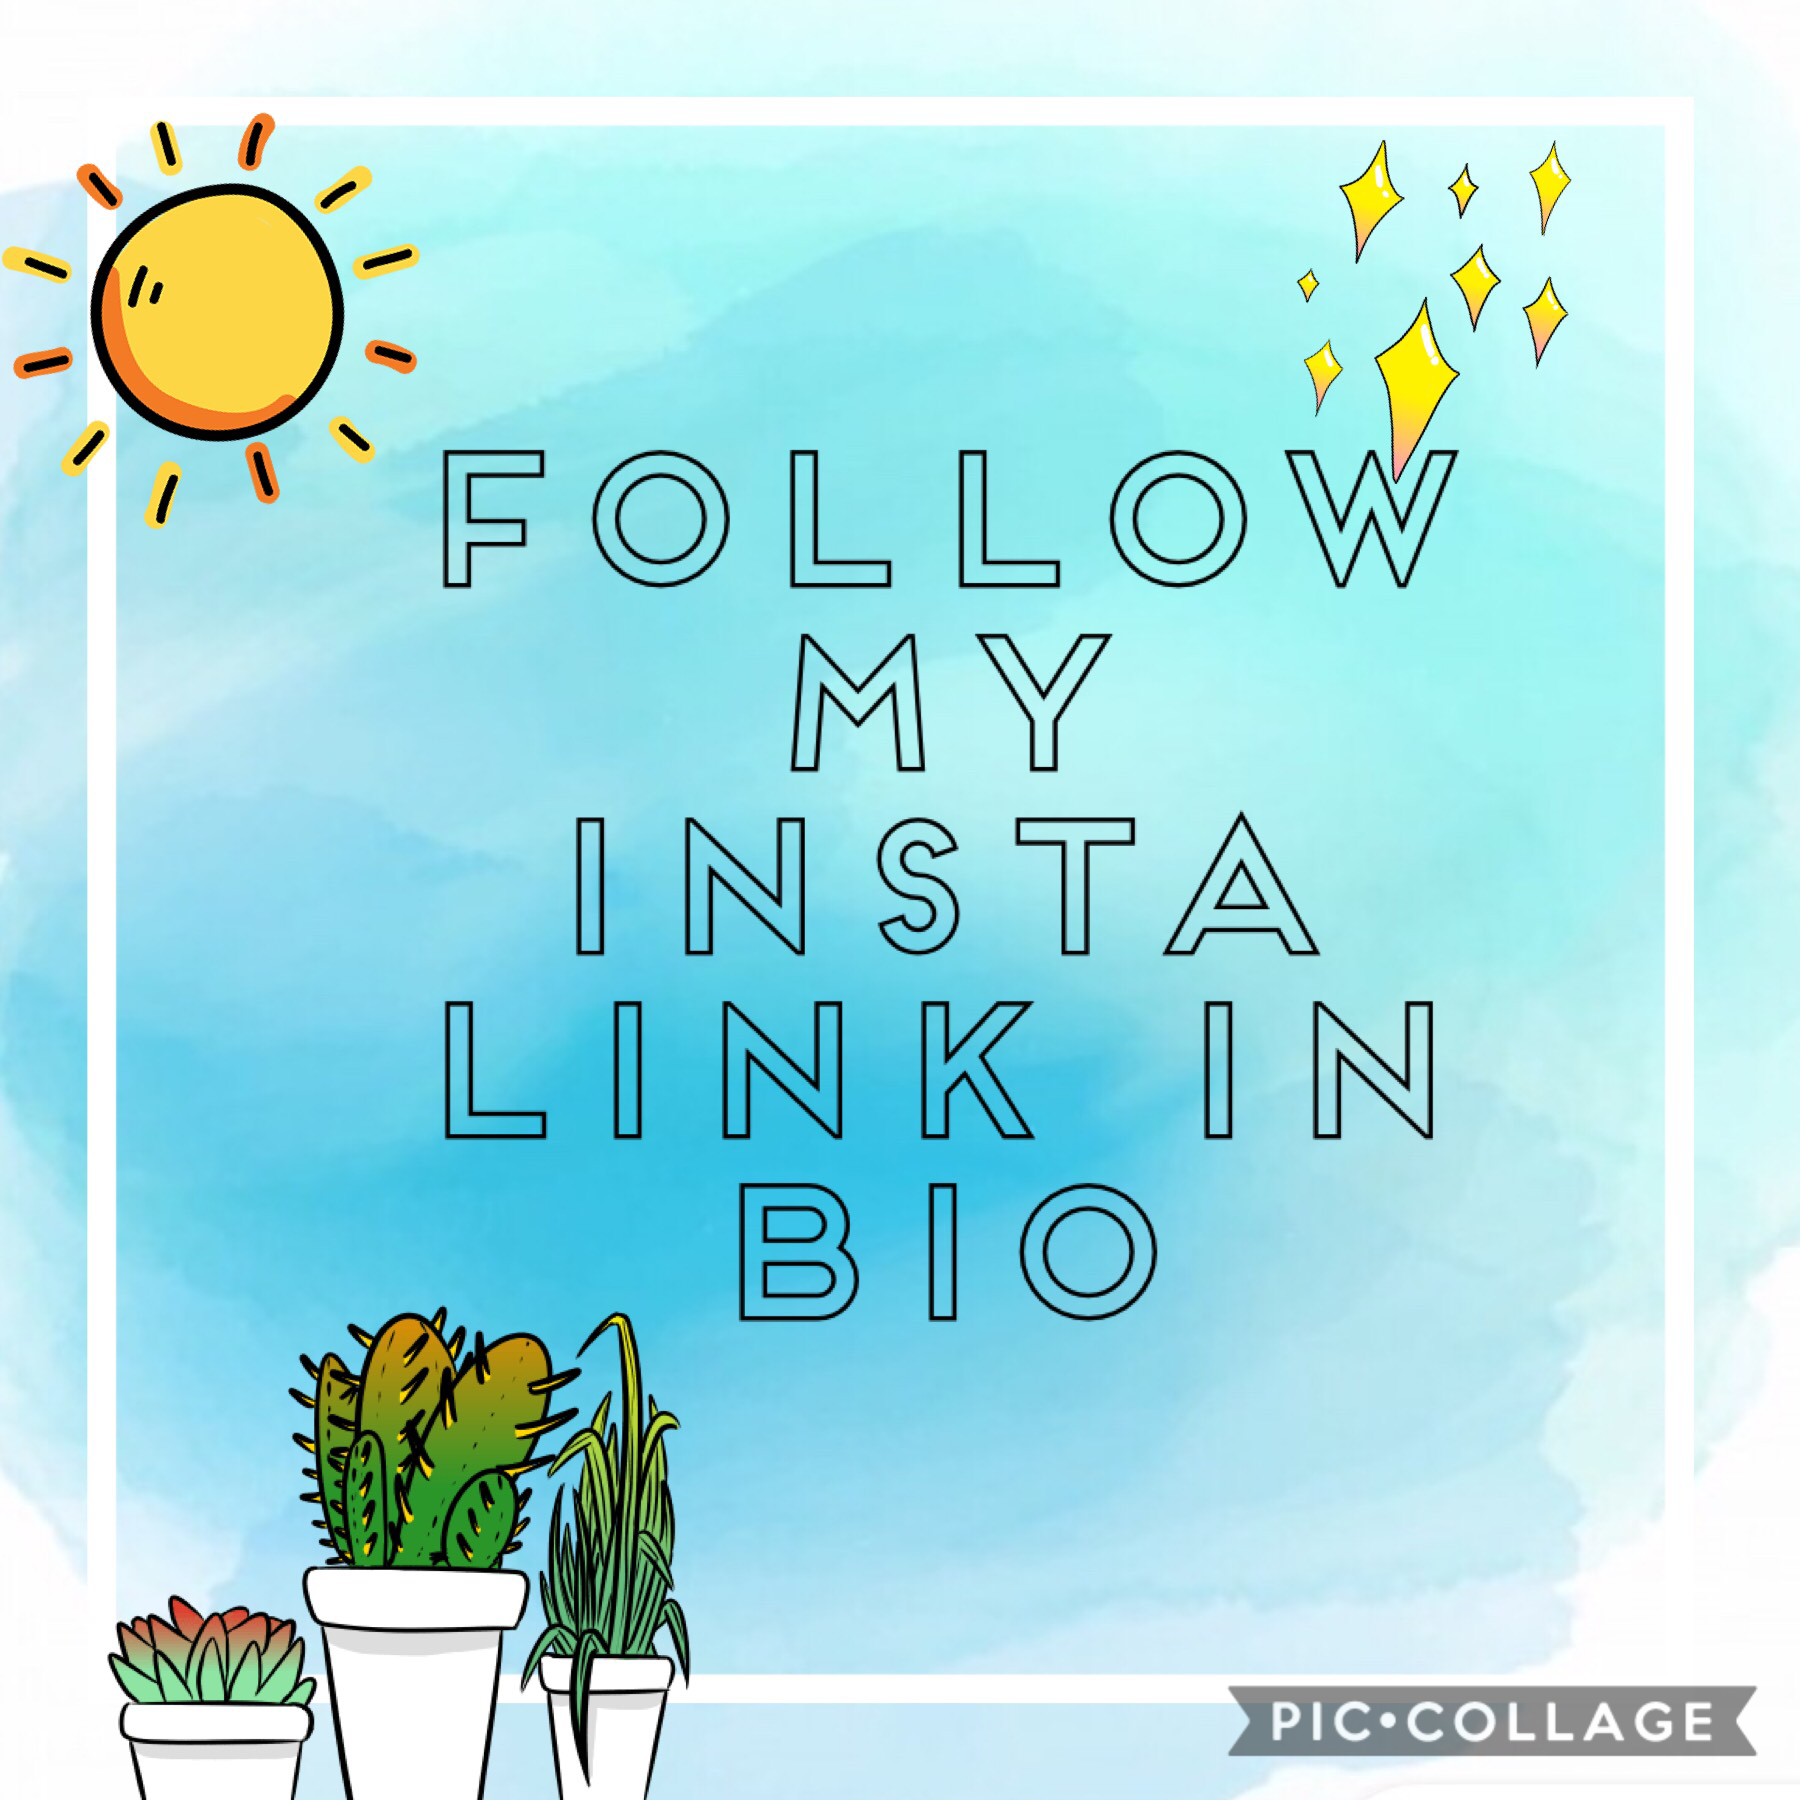 Don’t forget to follow me on pic collage and insta (I also do threads on insta) if you are from pic collage and followed me on insta do forget to say I’m from pic collage and ur user name so I can spam u with likes ❤️❤️